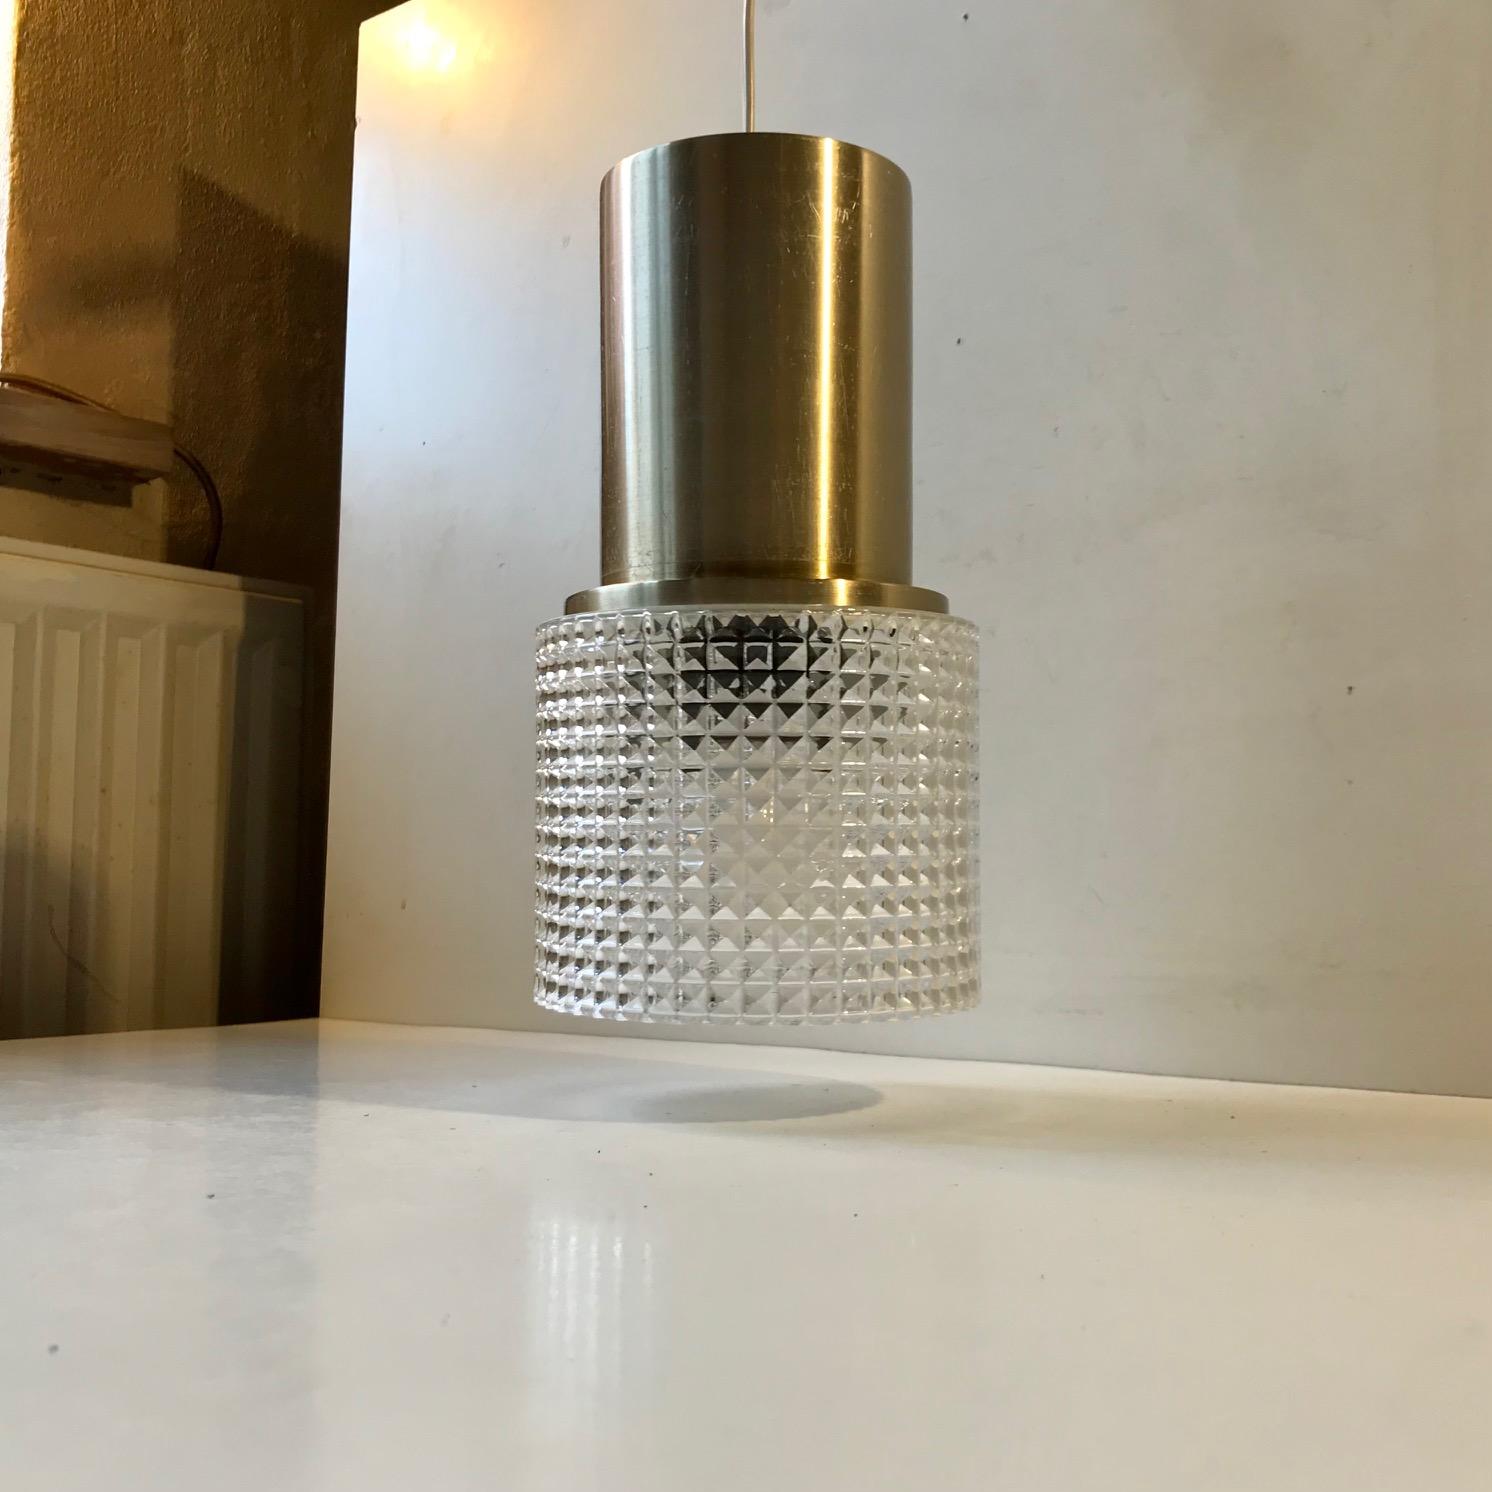 This pendant light was designed and manufactured by the Danish design trio Vitrika in the 1970s. The name Vitrika, or Vi-Tri-Ka means 'The three of us can do it'. The lamp features a geometric - diamond patterned clear glass shade. The socket and